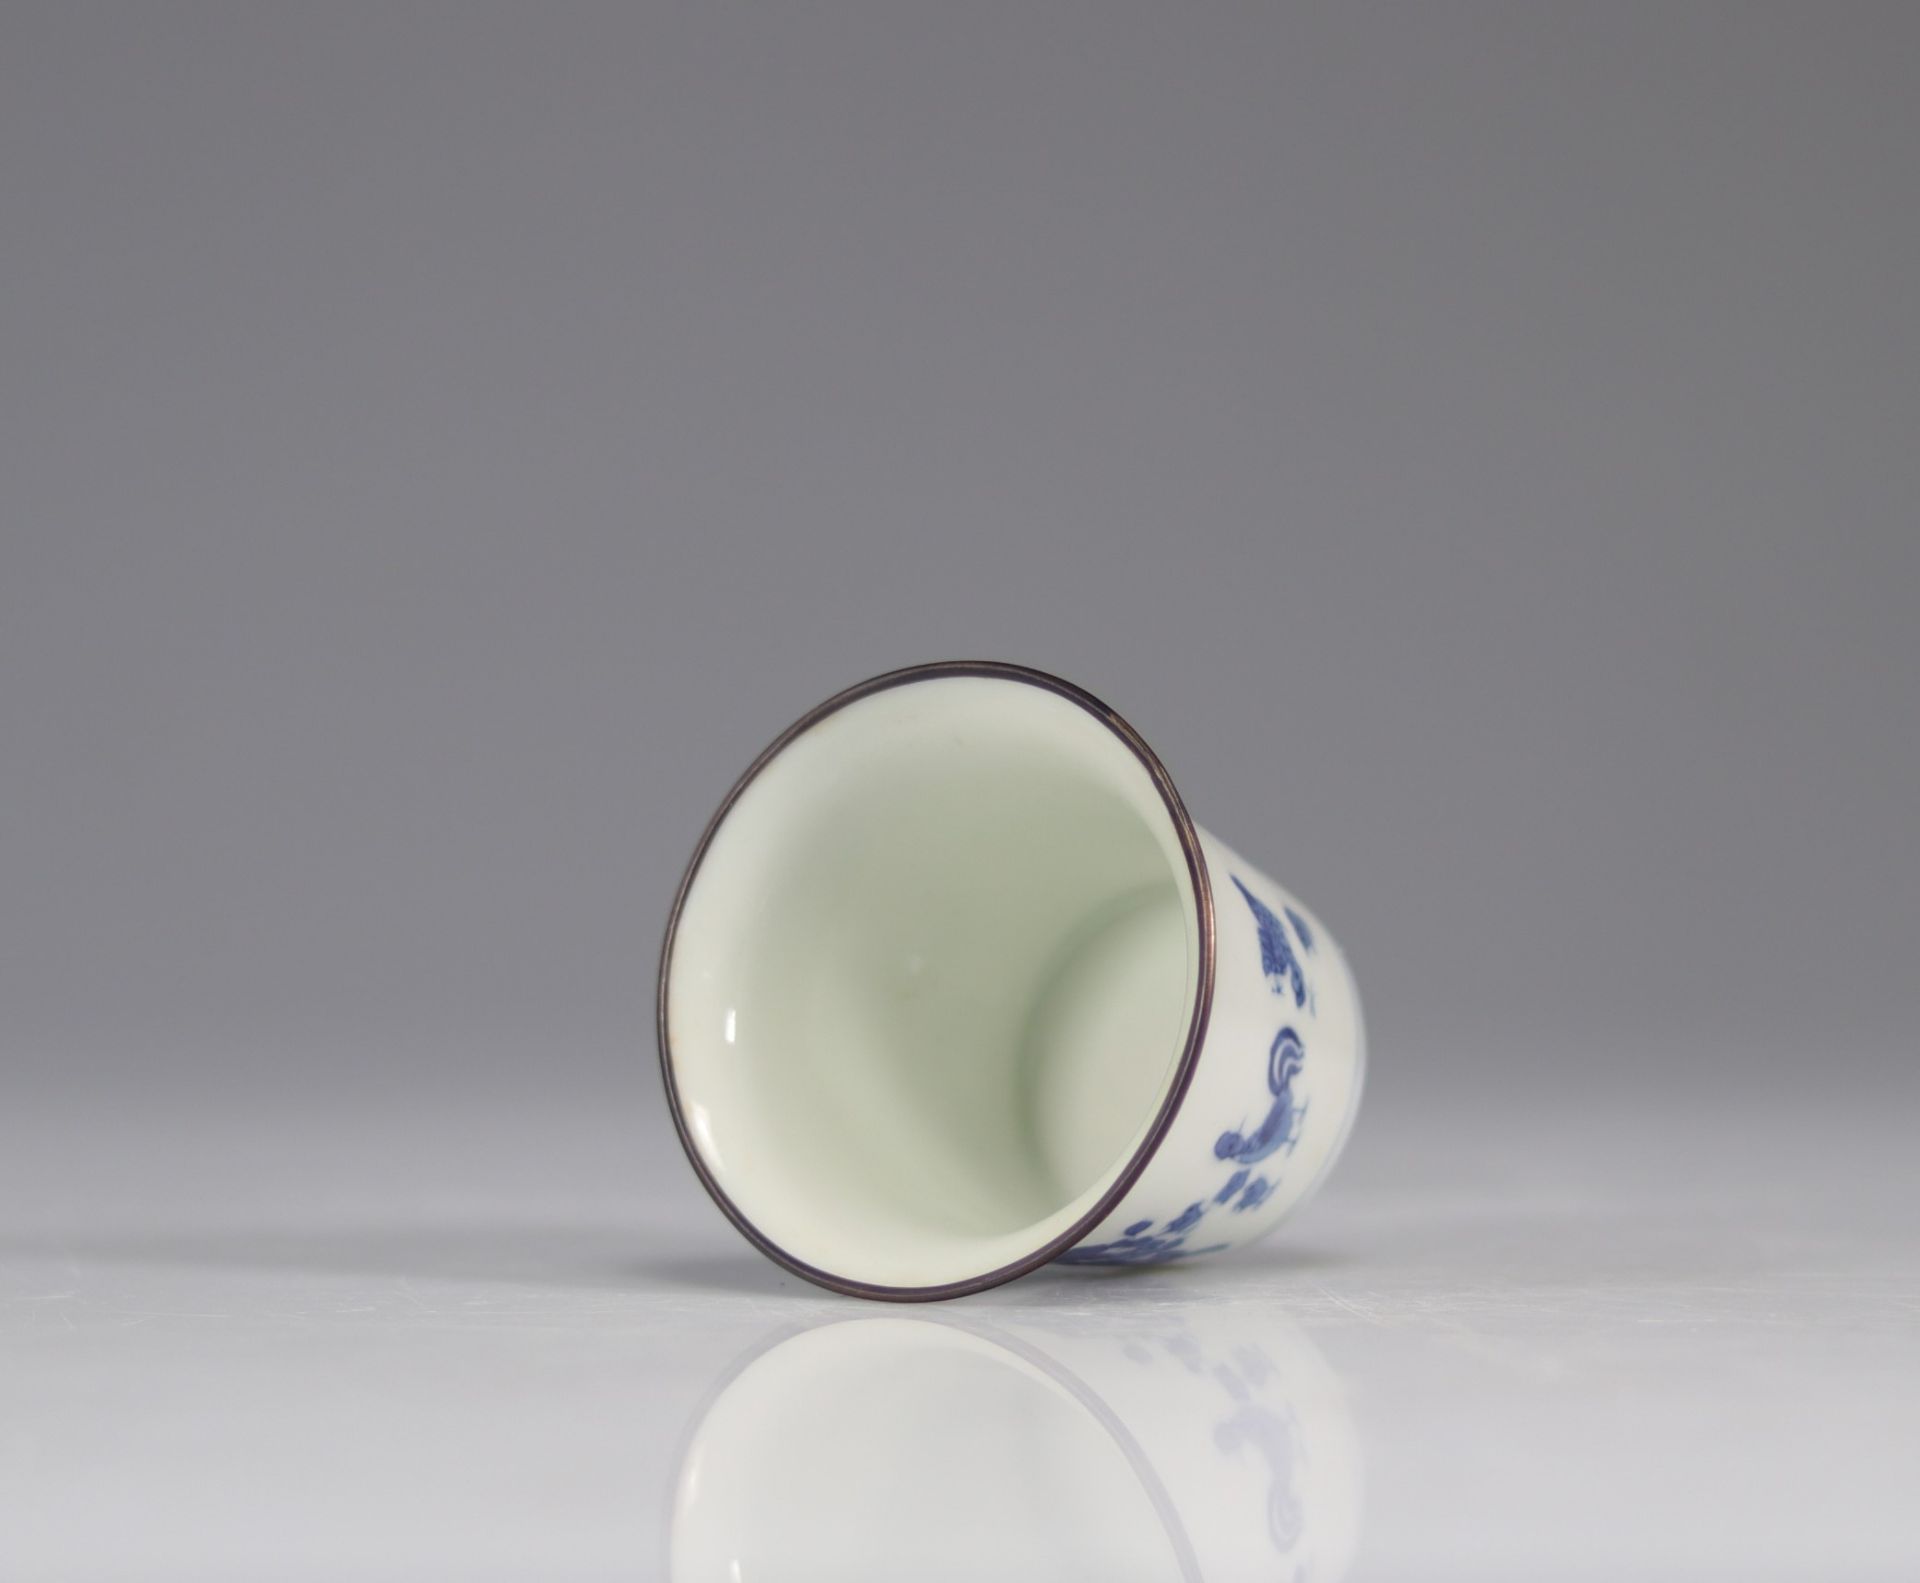 Rare blue white porcelain bowl 'Chicken cup' apocryphal mark Chenghua Qing dynasty - Image 4 of 5